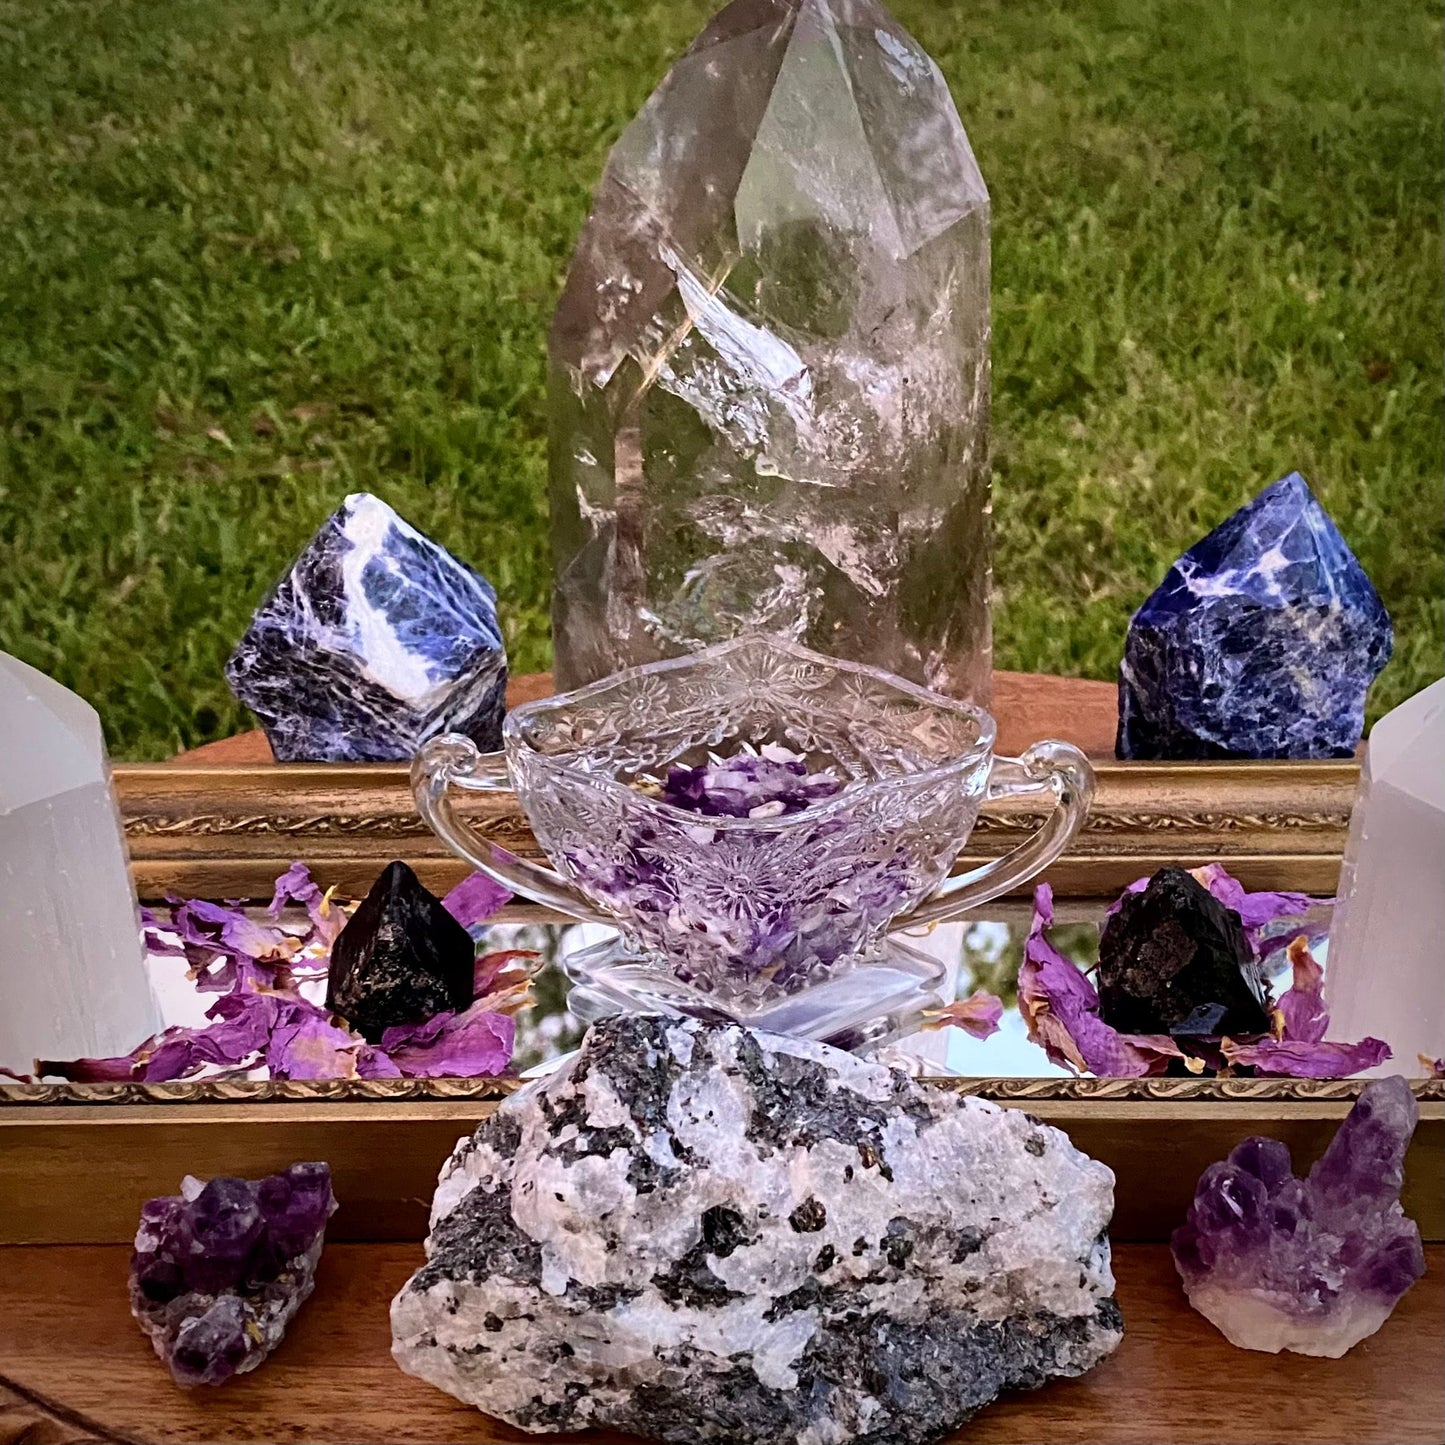 Spirit Protection Dream - a shield from harm using the boundless energy of the spirit world